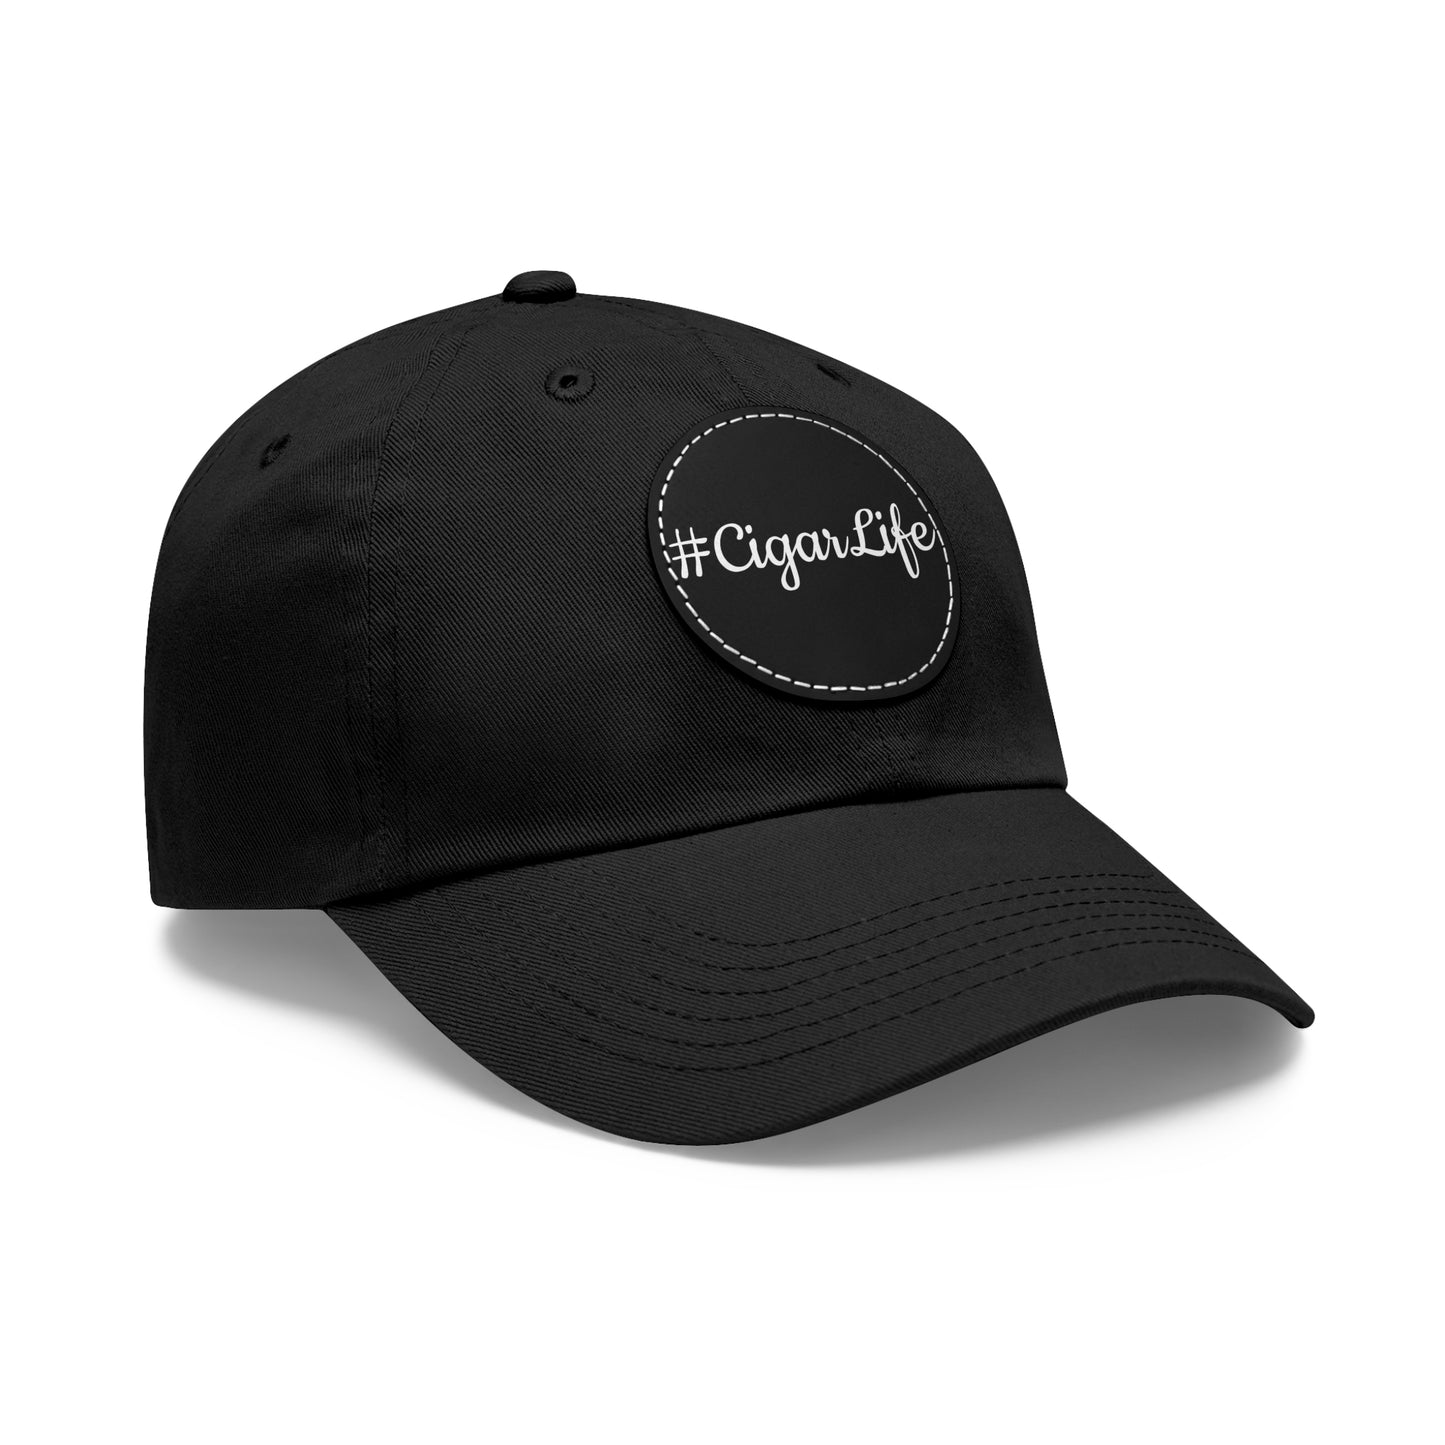 #CigarLife Dad Hat with Leather Patch (Round)